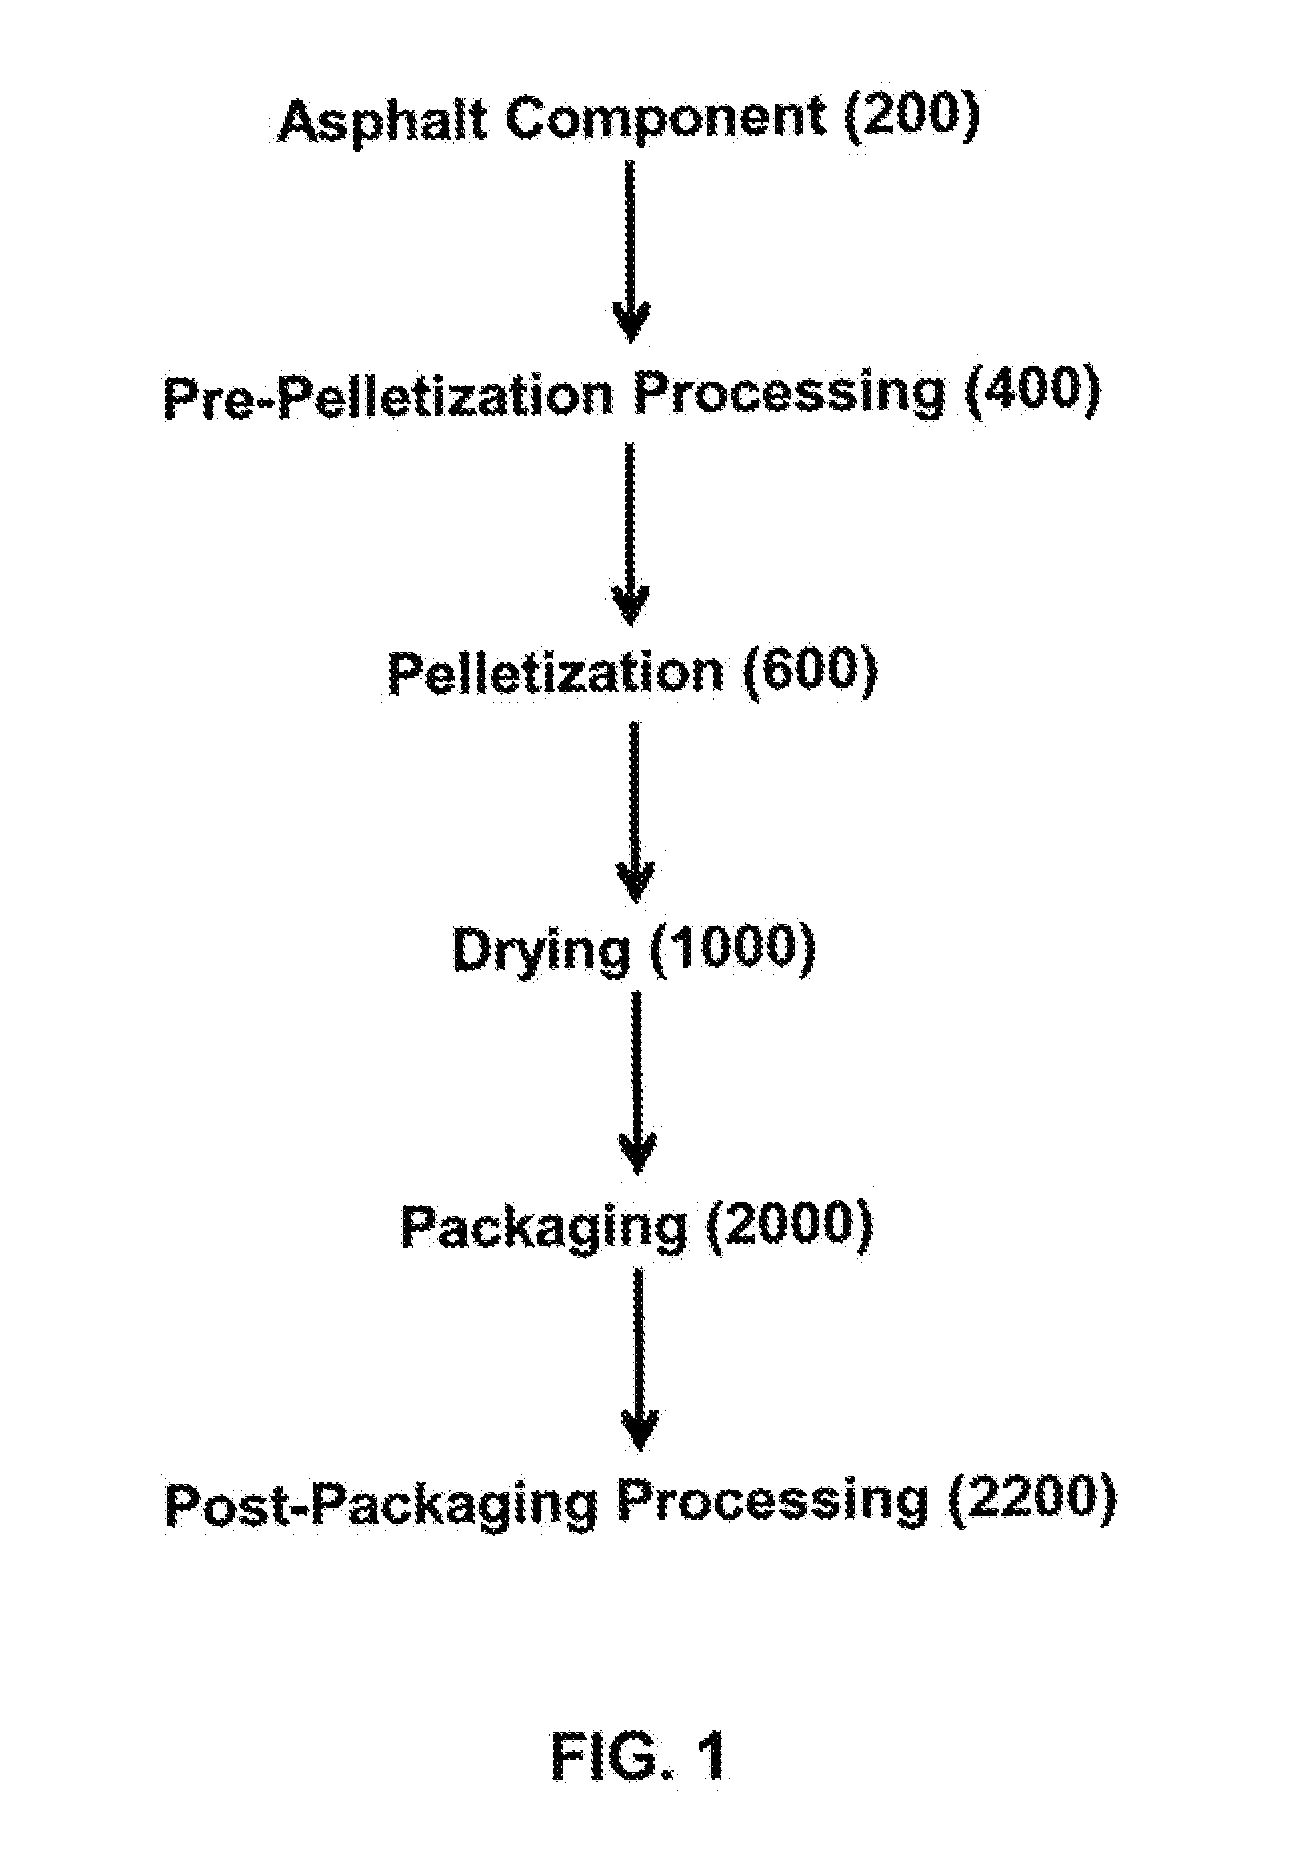 Continuous process for fractioning, combination, and recombination of asphalt components for pelletization and packaging of asphalt and asphalt-containing products